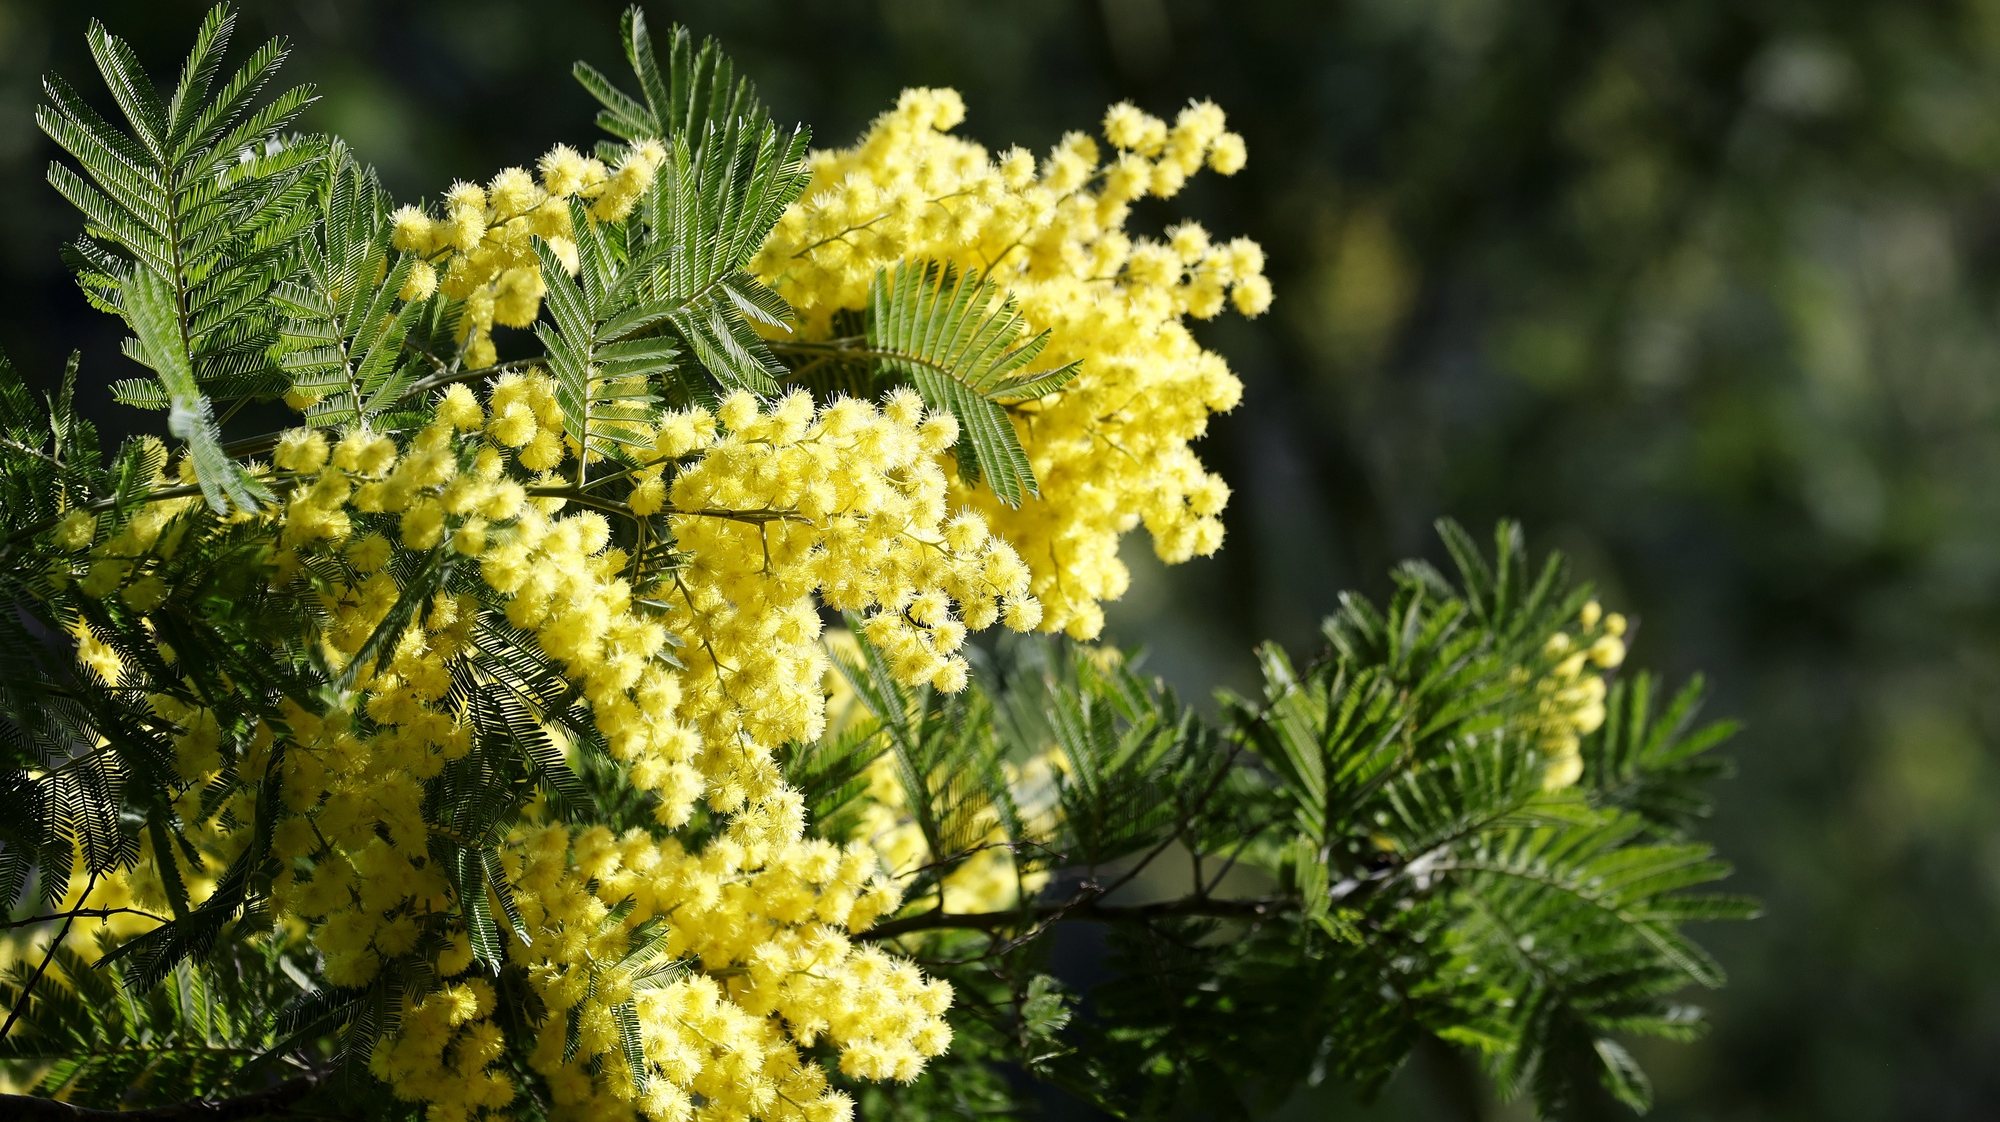 epa11152280 Mimosa flowers on the Augier farm in Tanneron, southern France, 14 February 2024. The Tanneron Massif is the largest mimosa forest in Europe. The mimosa tree, also called silver wattle or blue wattle (Acacia dealbata) blooms from December to March. Mimosa flowers are used as cut flowers by florists or in perfume industry and the timber can be used for craft furniture. In Tanneron, mimosa is cultivated for florists and for export.  EPA/SEBASTIEN NOGIER